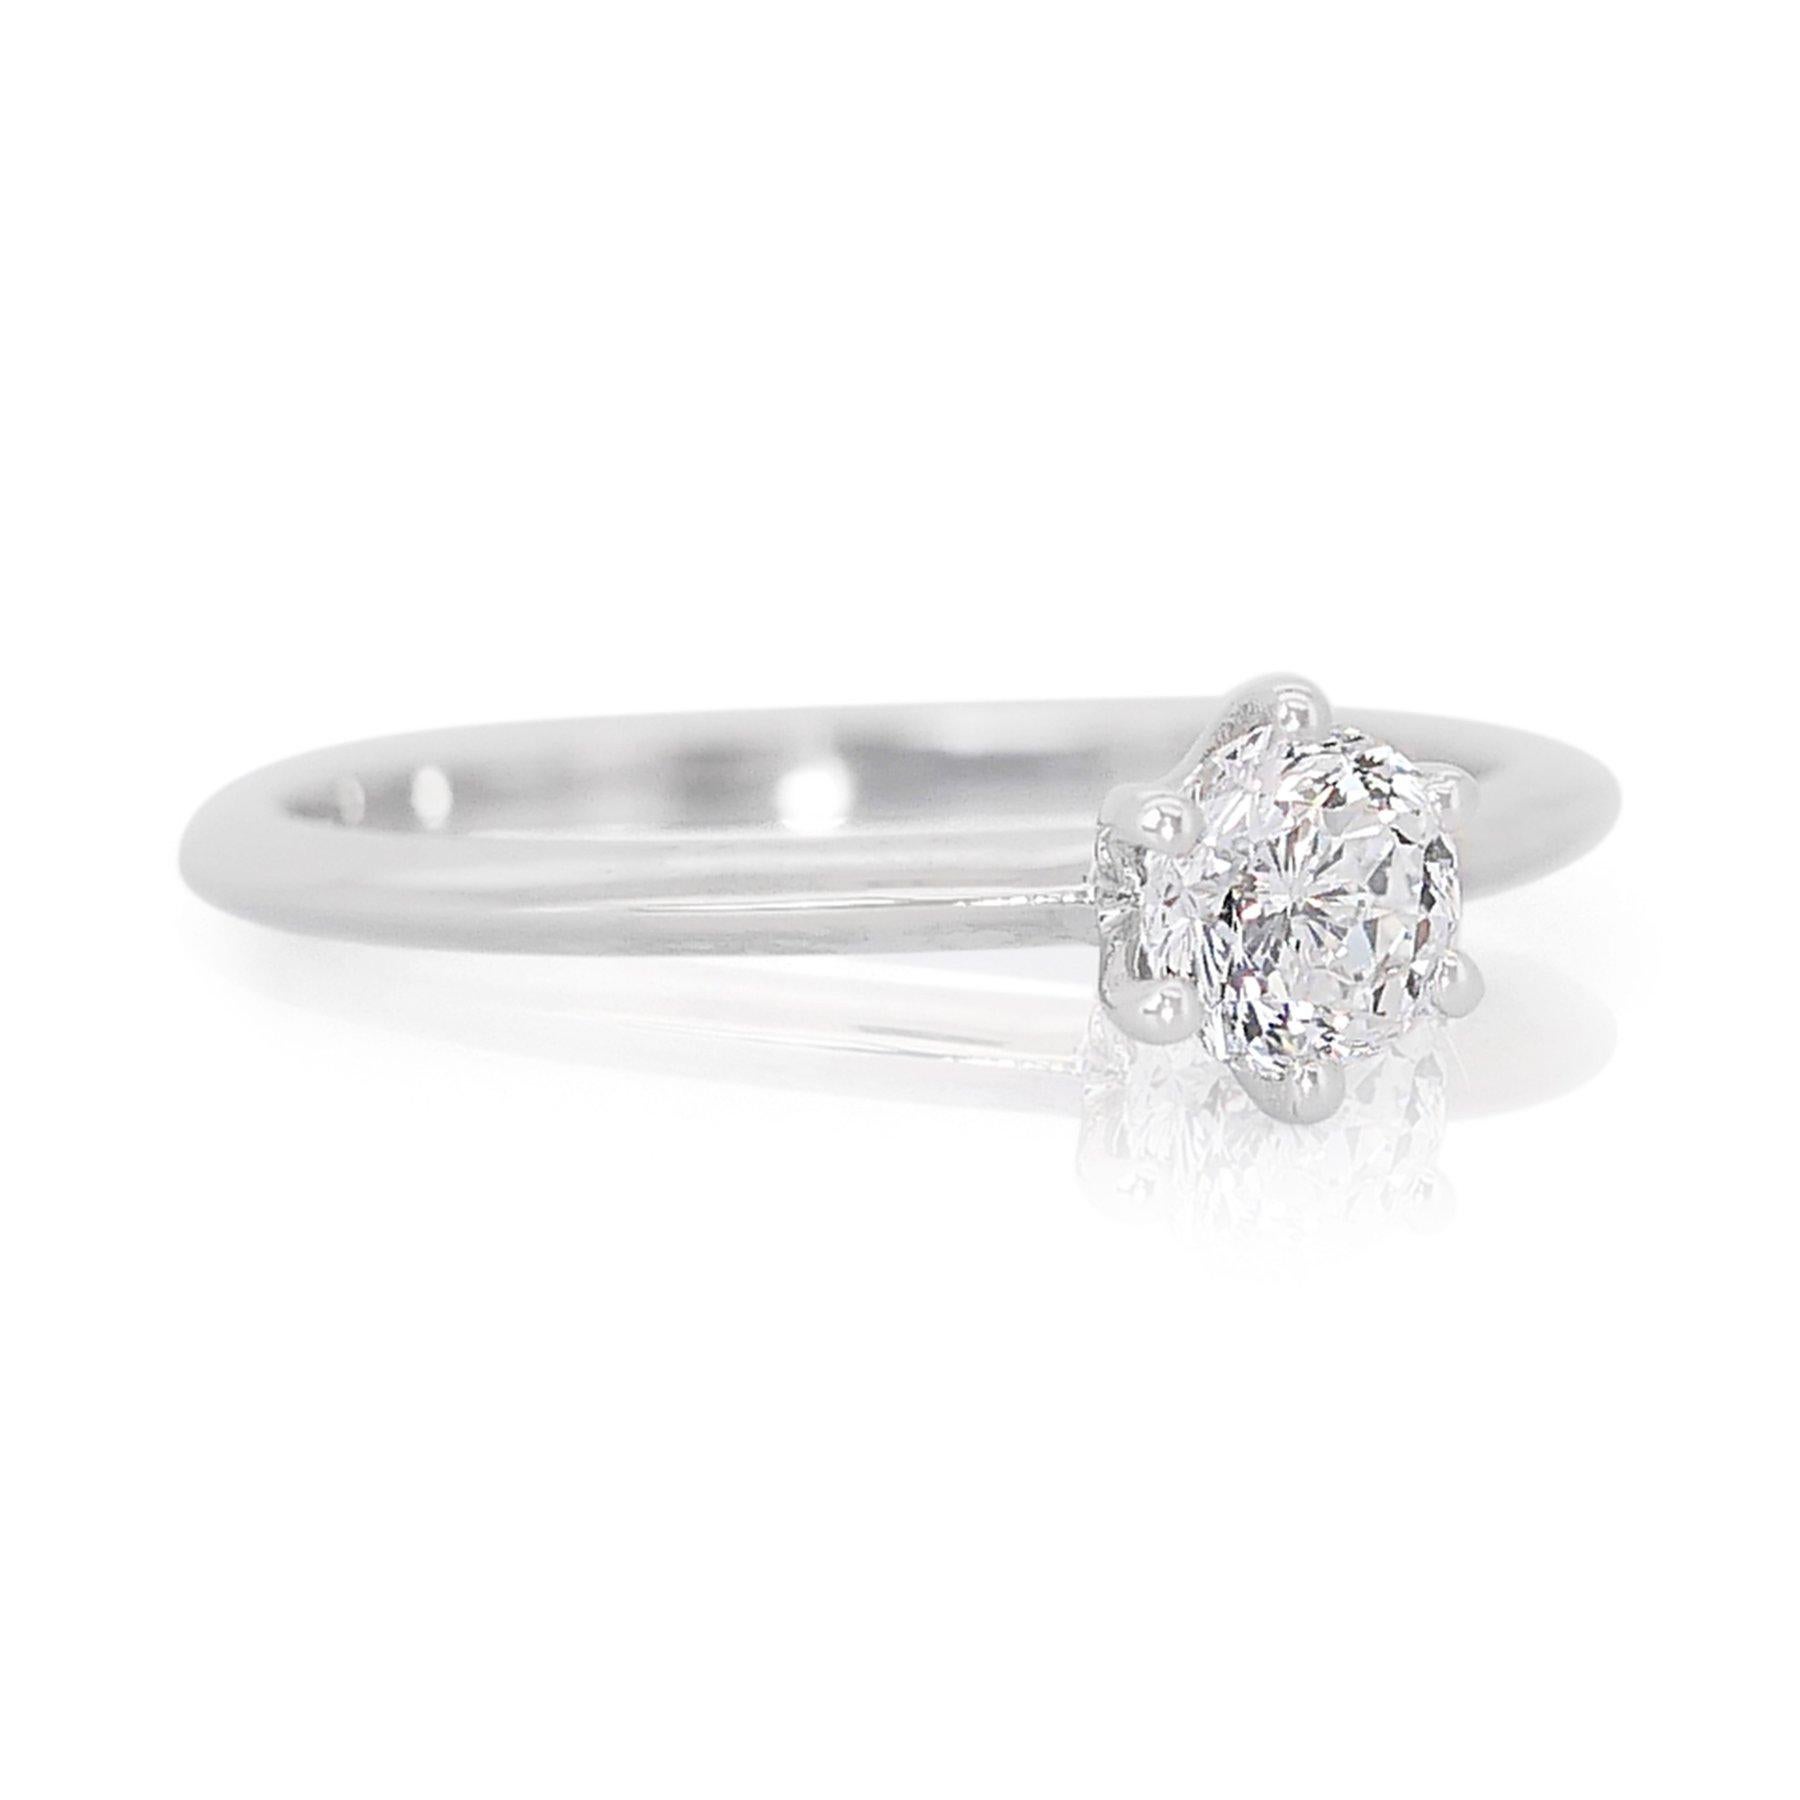 Exquisite 0.70ct Round Diamond Solitaire Ring in 18k White Gold - GIA Certified

Experience perfection with this stunning 0.70-carat round solitaire diamond ring, meticulously crafted in lustrous 18k white gold. This exquisite piece is accompanied